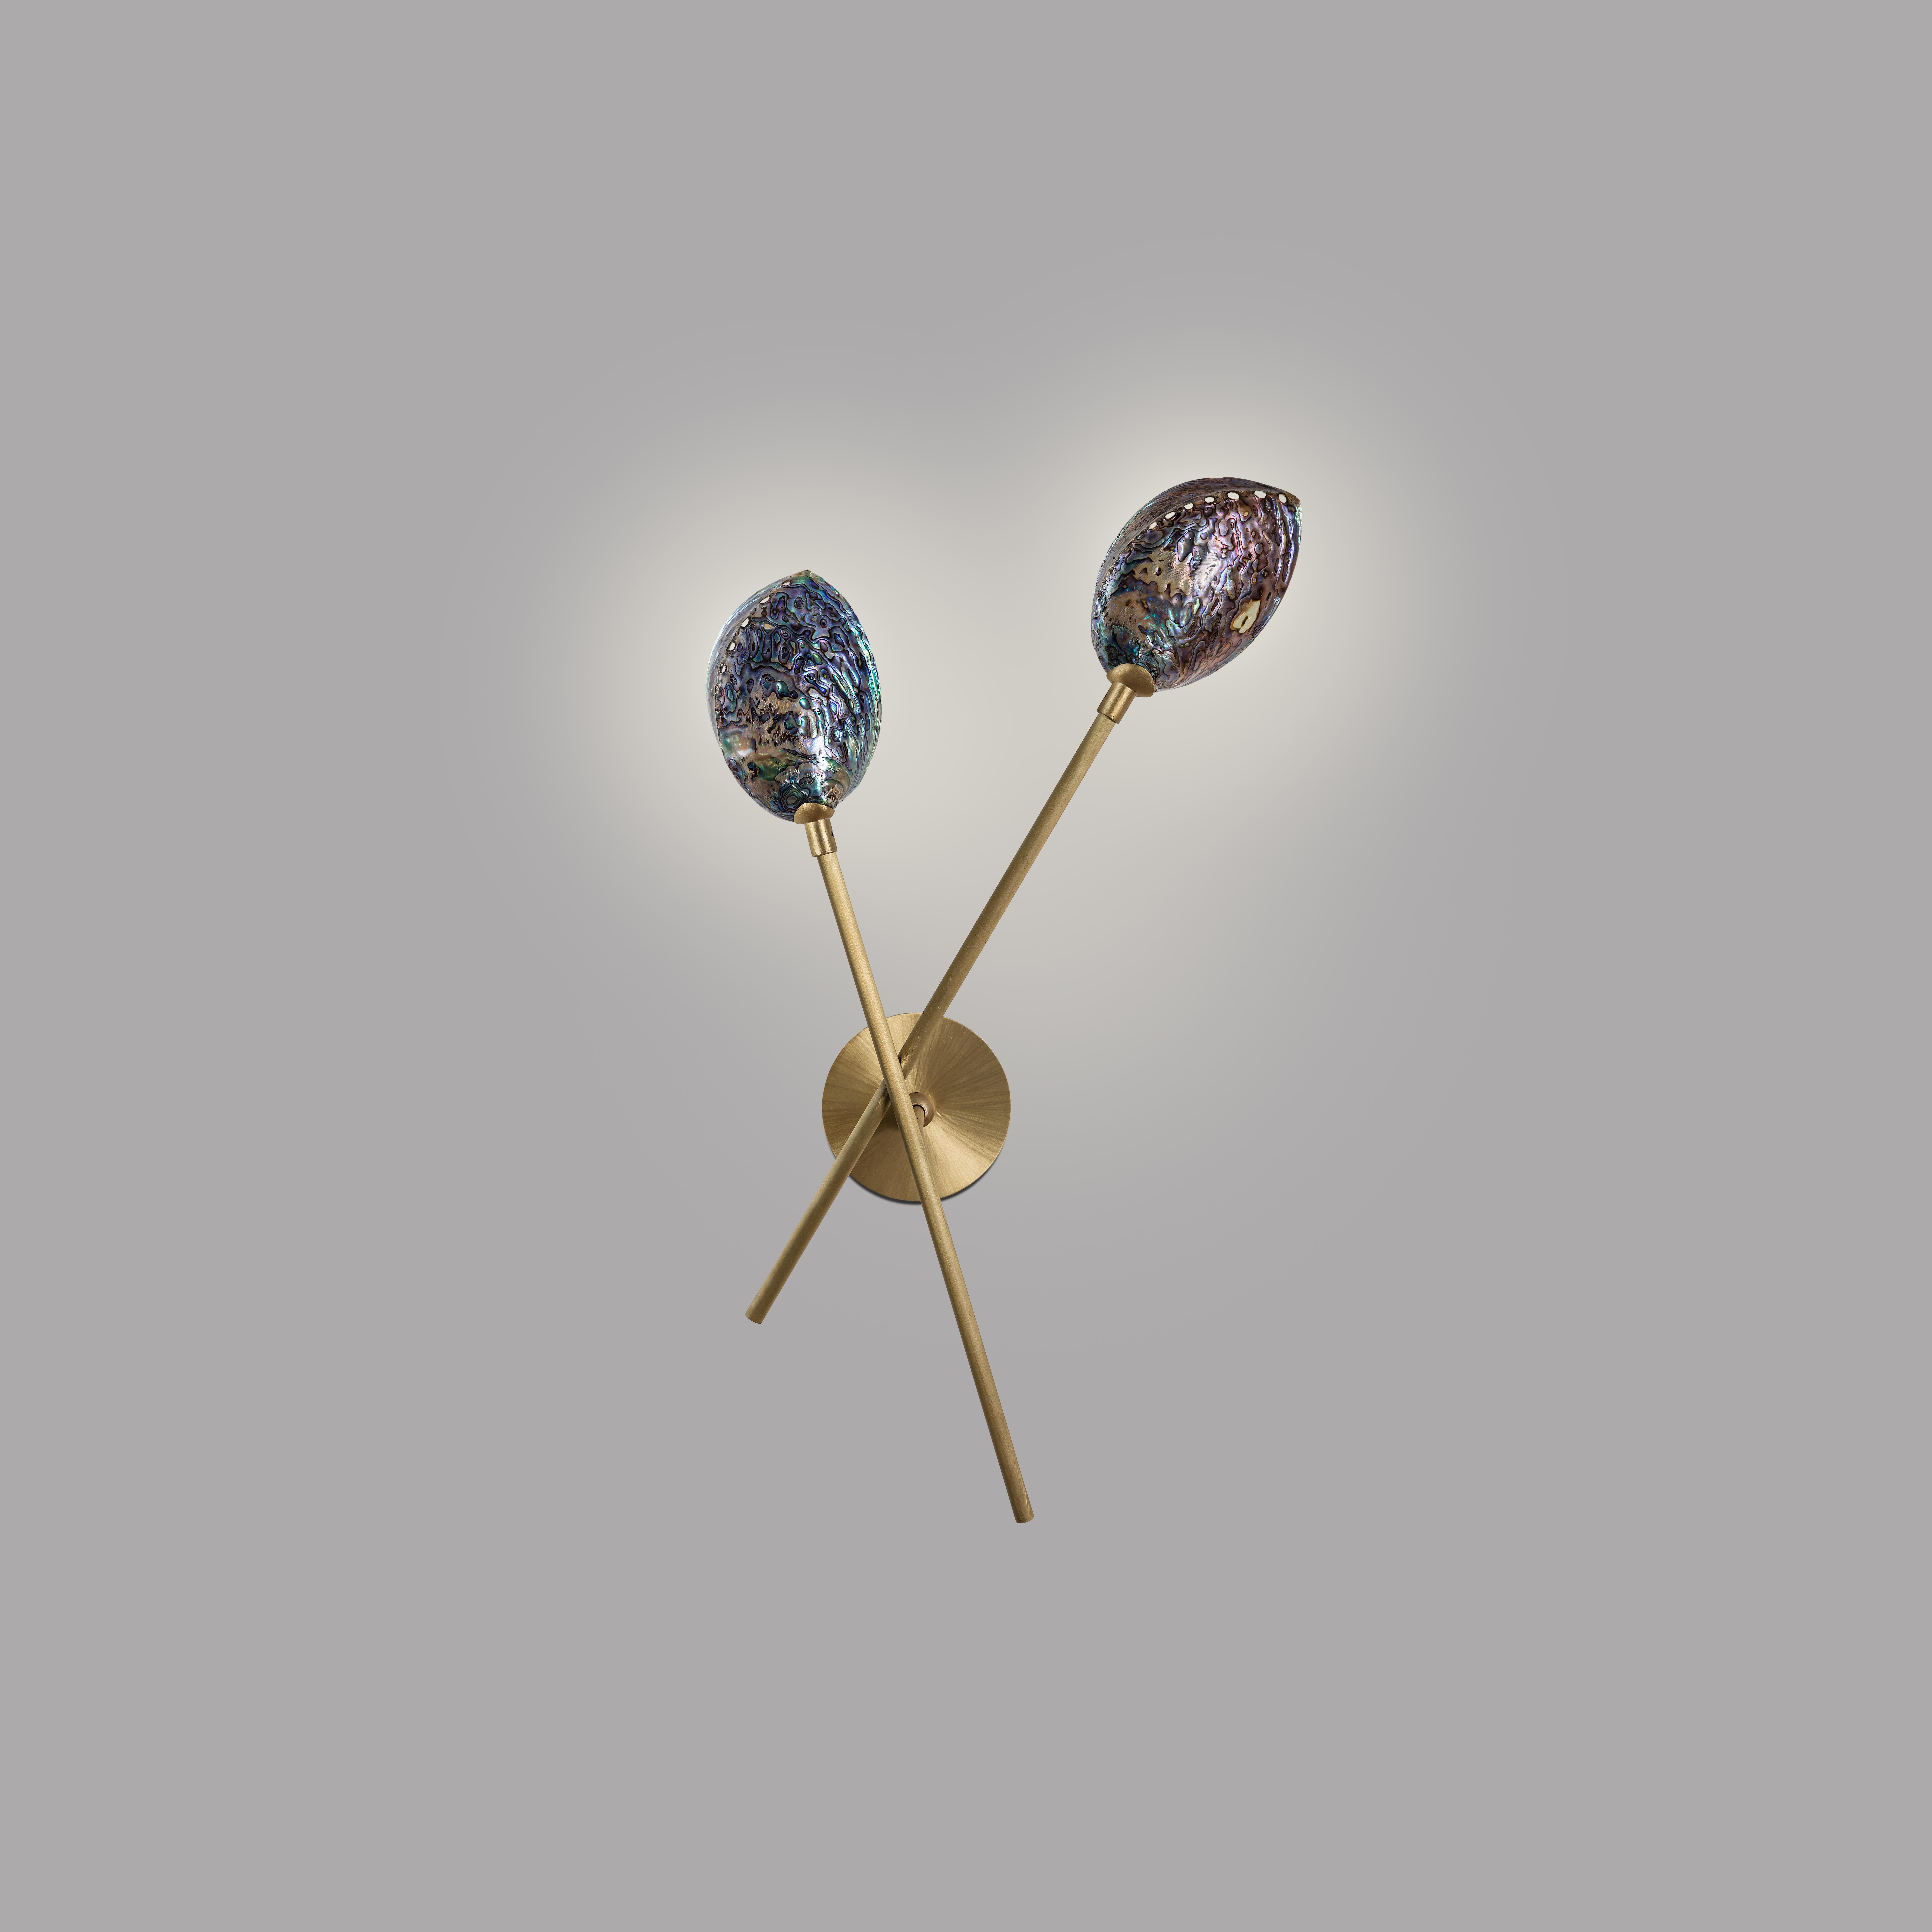 Coquillage wall light II by Ludovic Clément d’Armont
Dimensions: D 14 x W 40 x H 65 cm
Materials: Shell, brass.

Ludovic Clément d’Armont is in the continuation of a family tradition of centuries of gentle glassmakers, painters, carpenters and